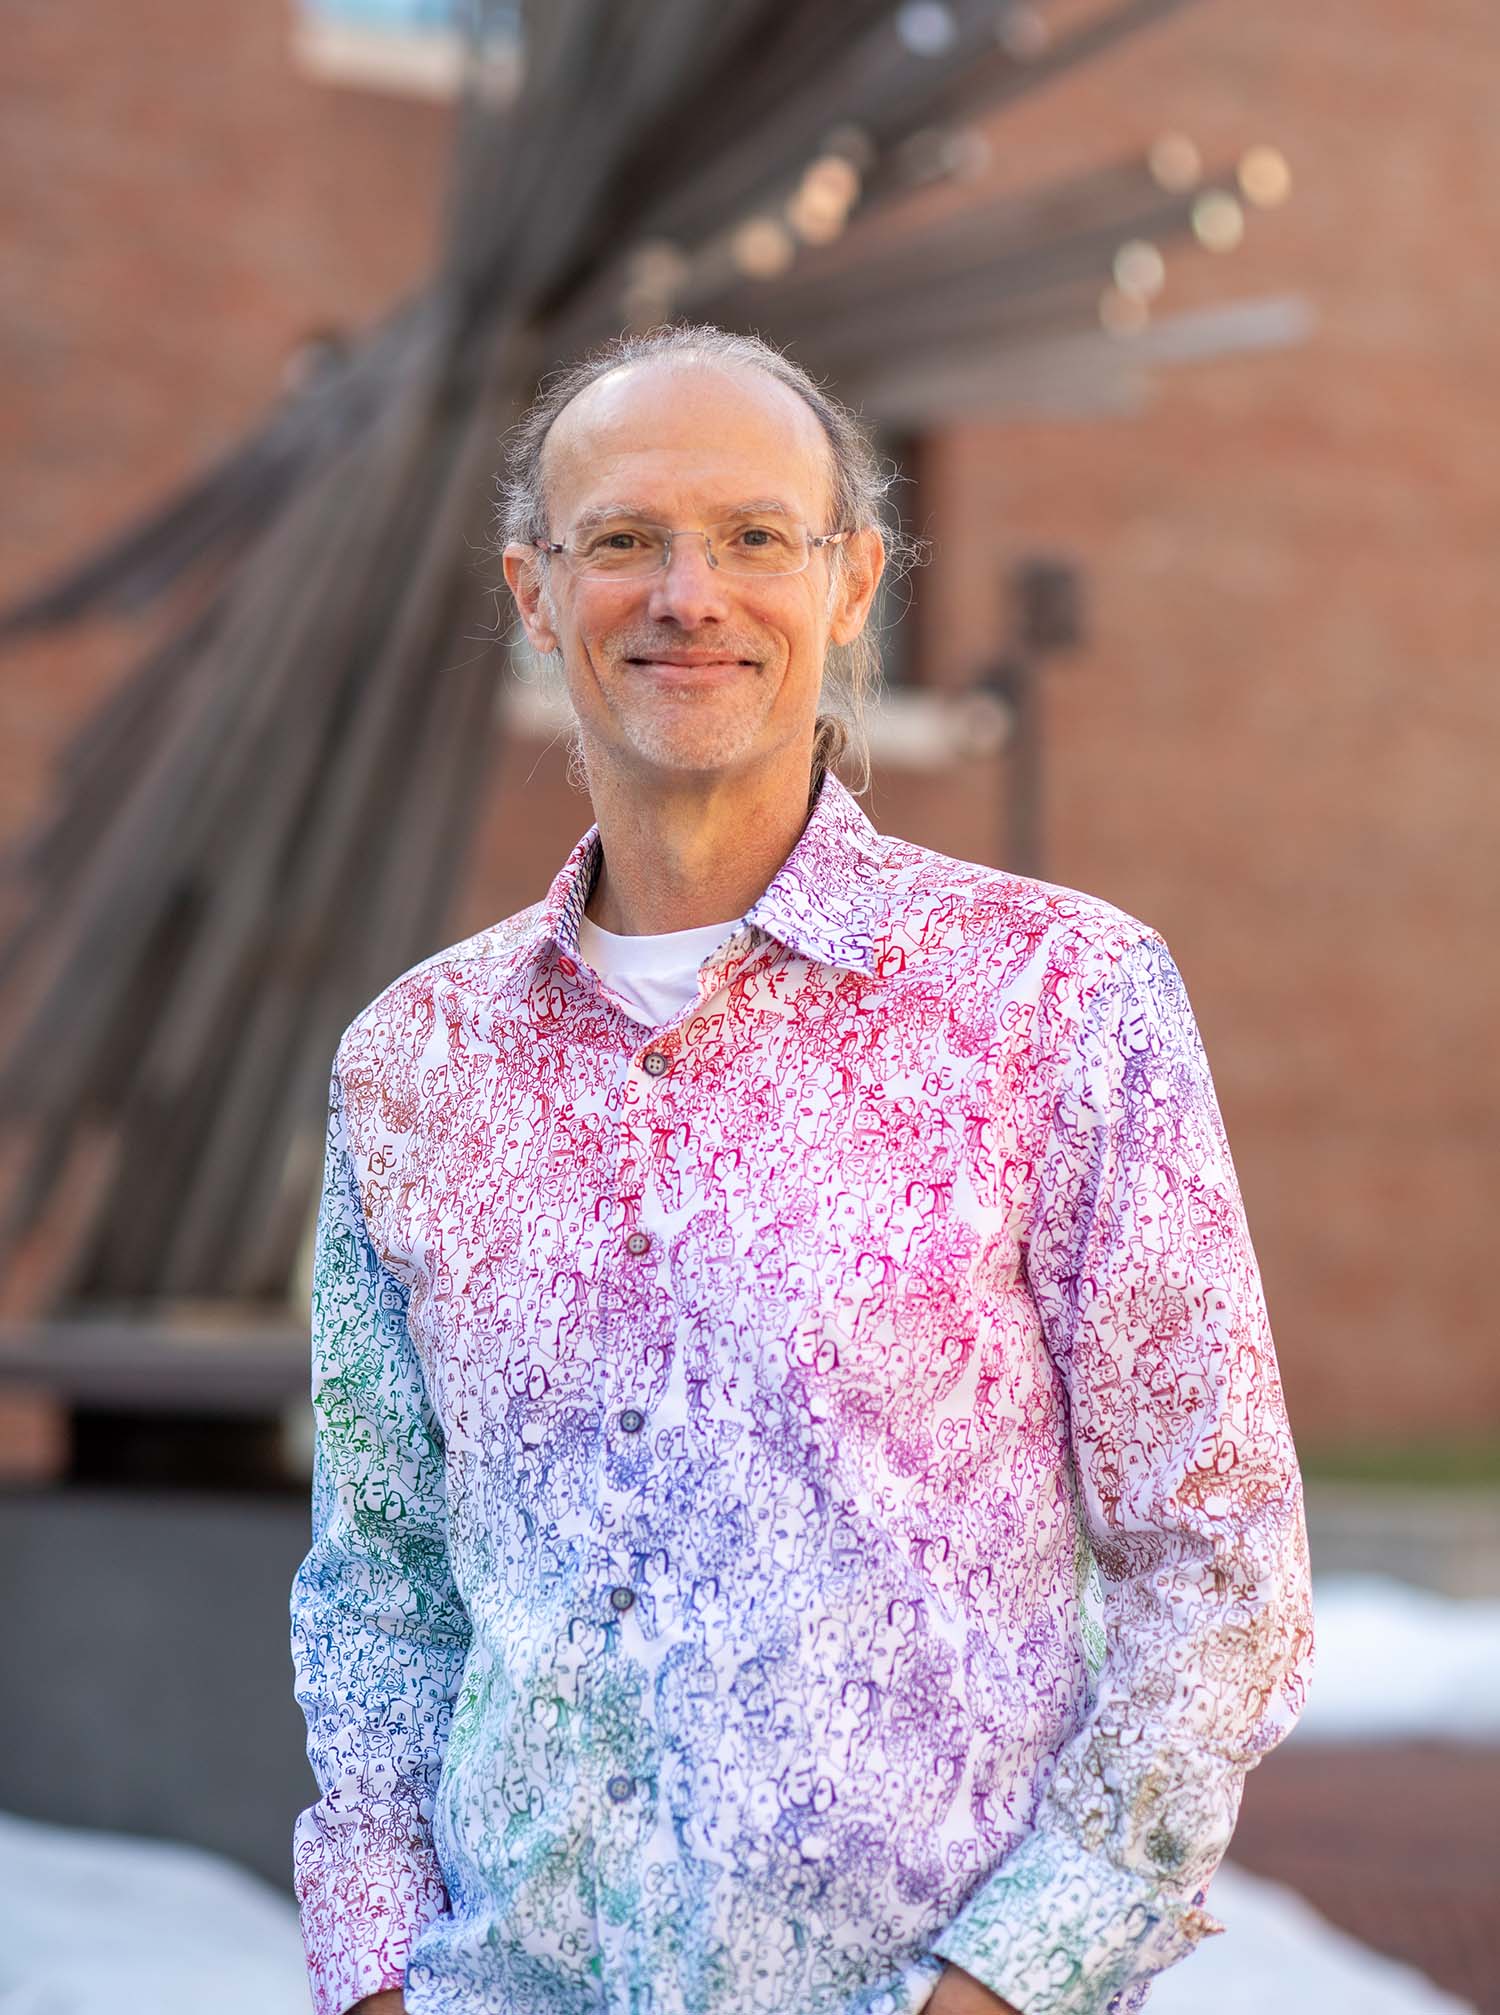 Photo of Mark Grinstaff, a middle-aged white man with glasses who wears a button-down shirt with a gradient, squiggly line pattern that fades from green and blue to red and pink. He smiles as he stands outside with his hands in his pockets.